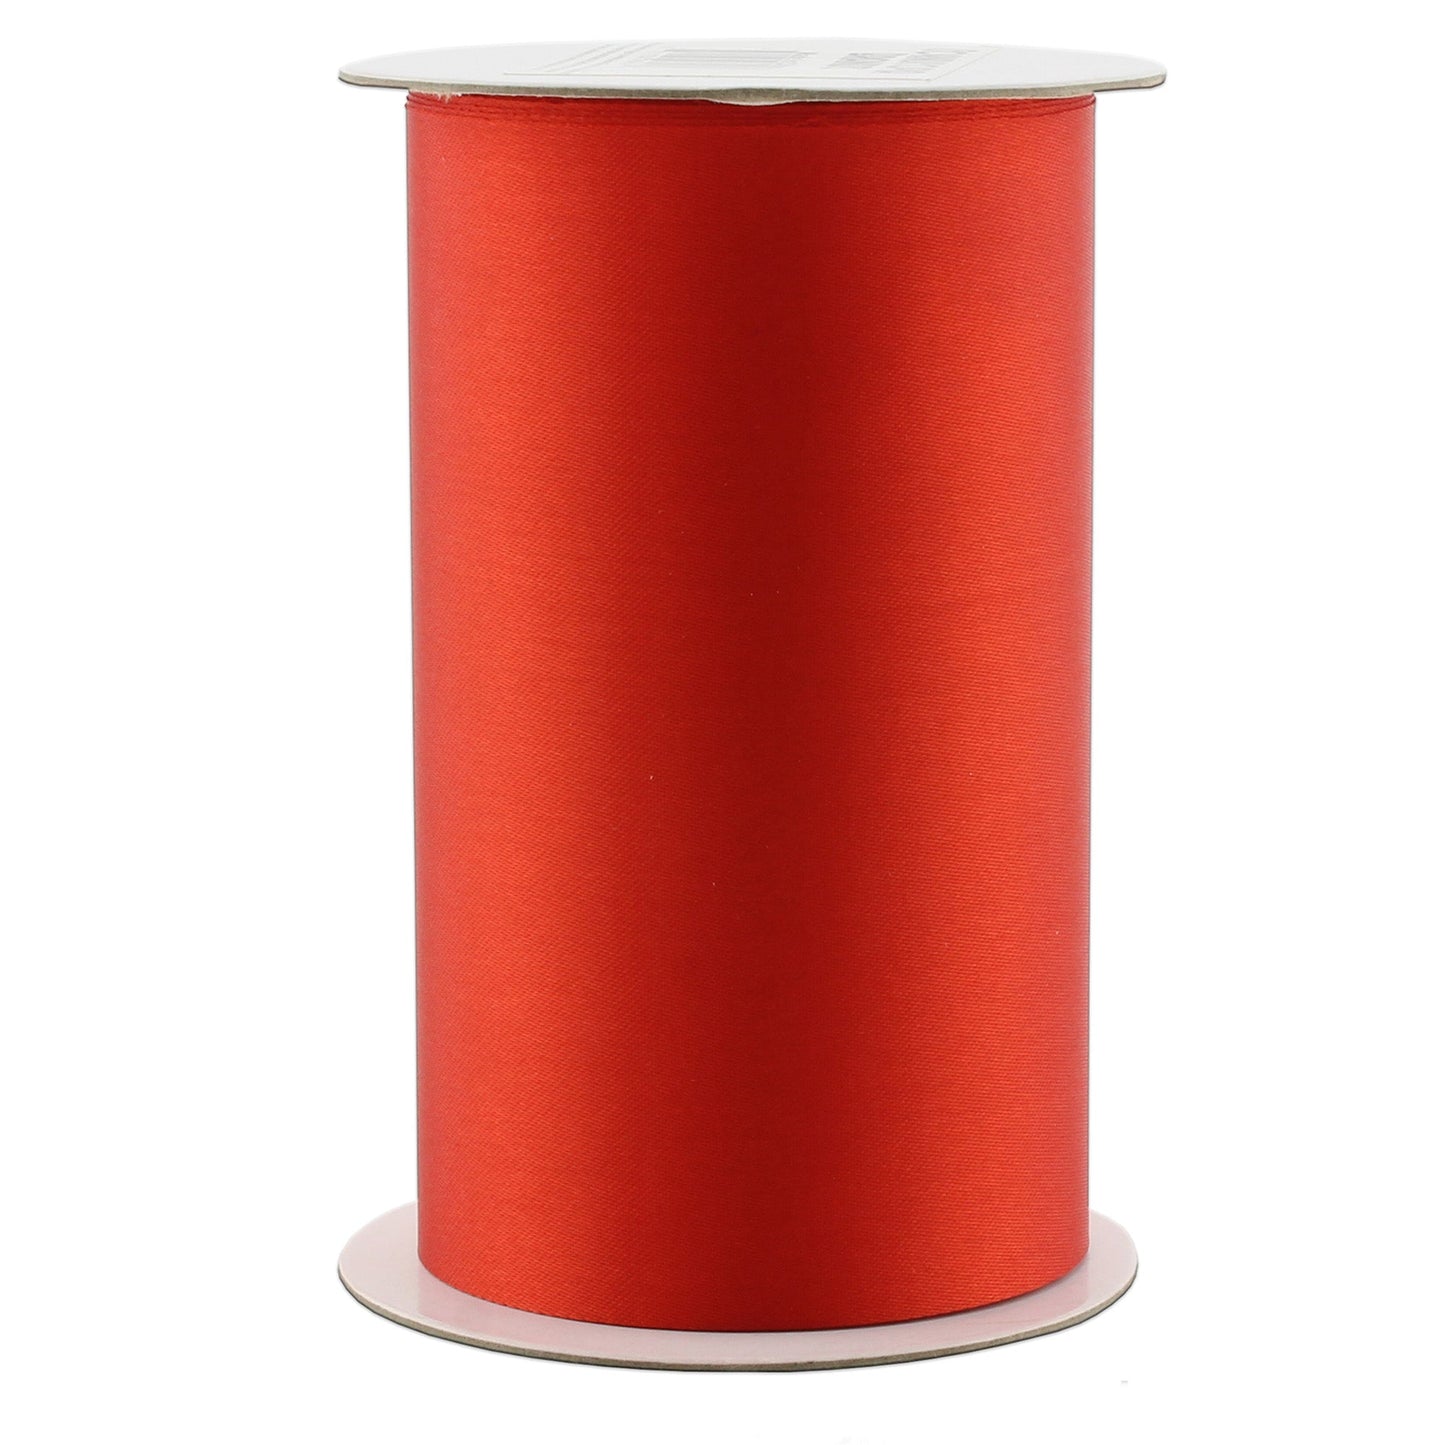 4-Inch Wide Red Satin Ribbon (10 Yards) - sh1009cb0Red